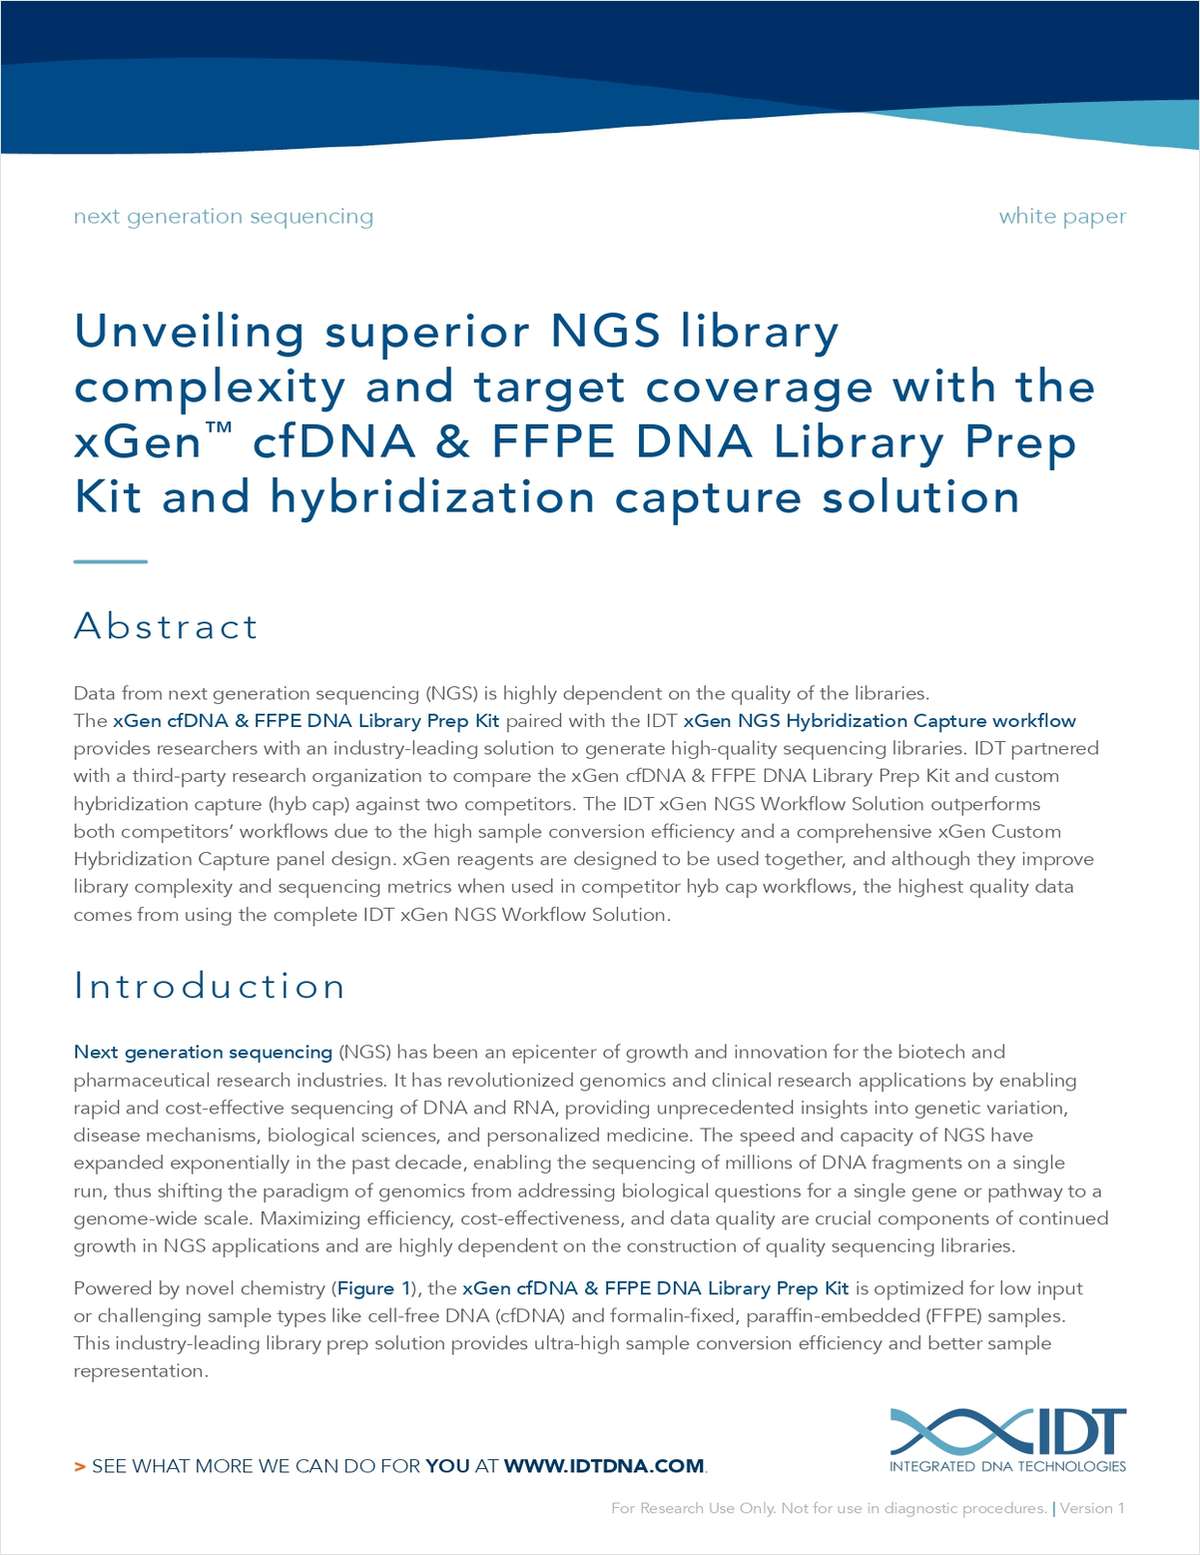 Unveiling Superior NGS Library Complexity and Target Coverage With the xGen cfDNA and FFPE DNA Library Prep Kit and Hybridization Capture Solution